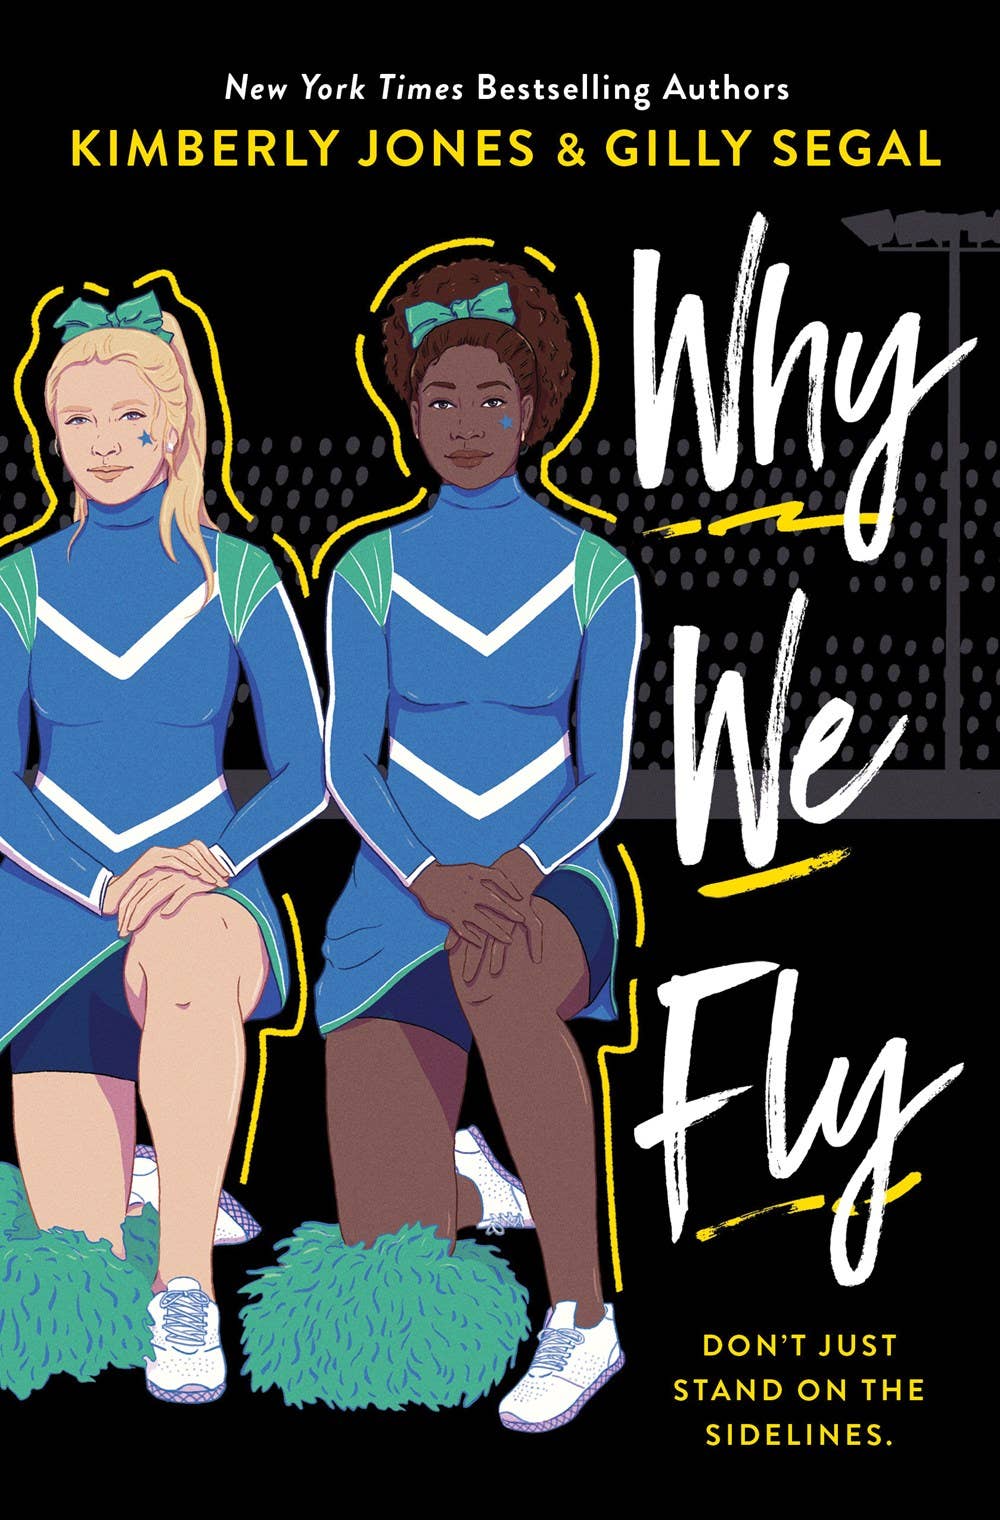 Why We Fly by Kimberly Jones & Gilly Segal (Hardcover)